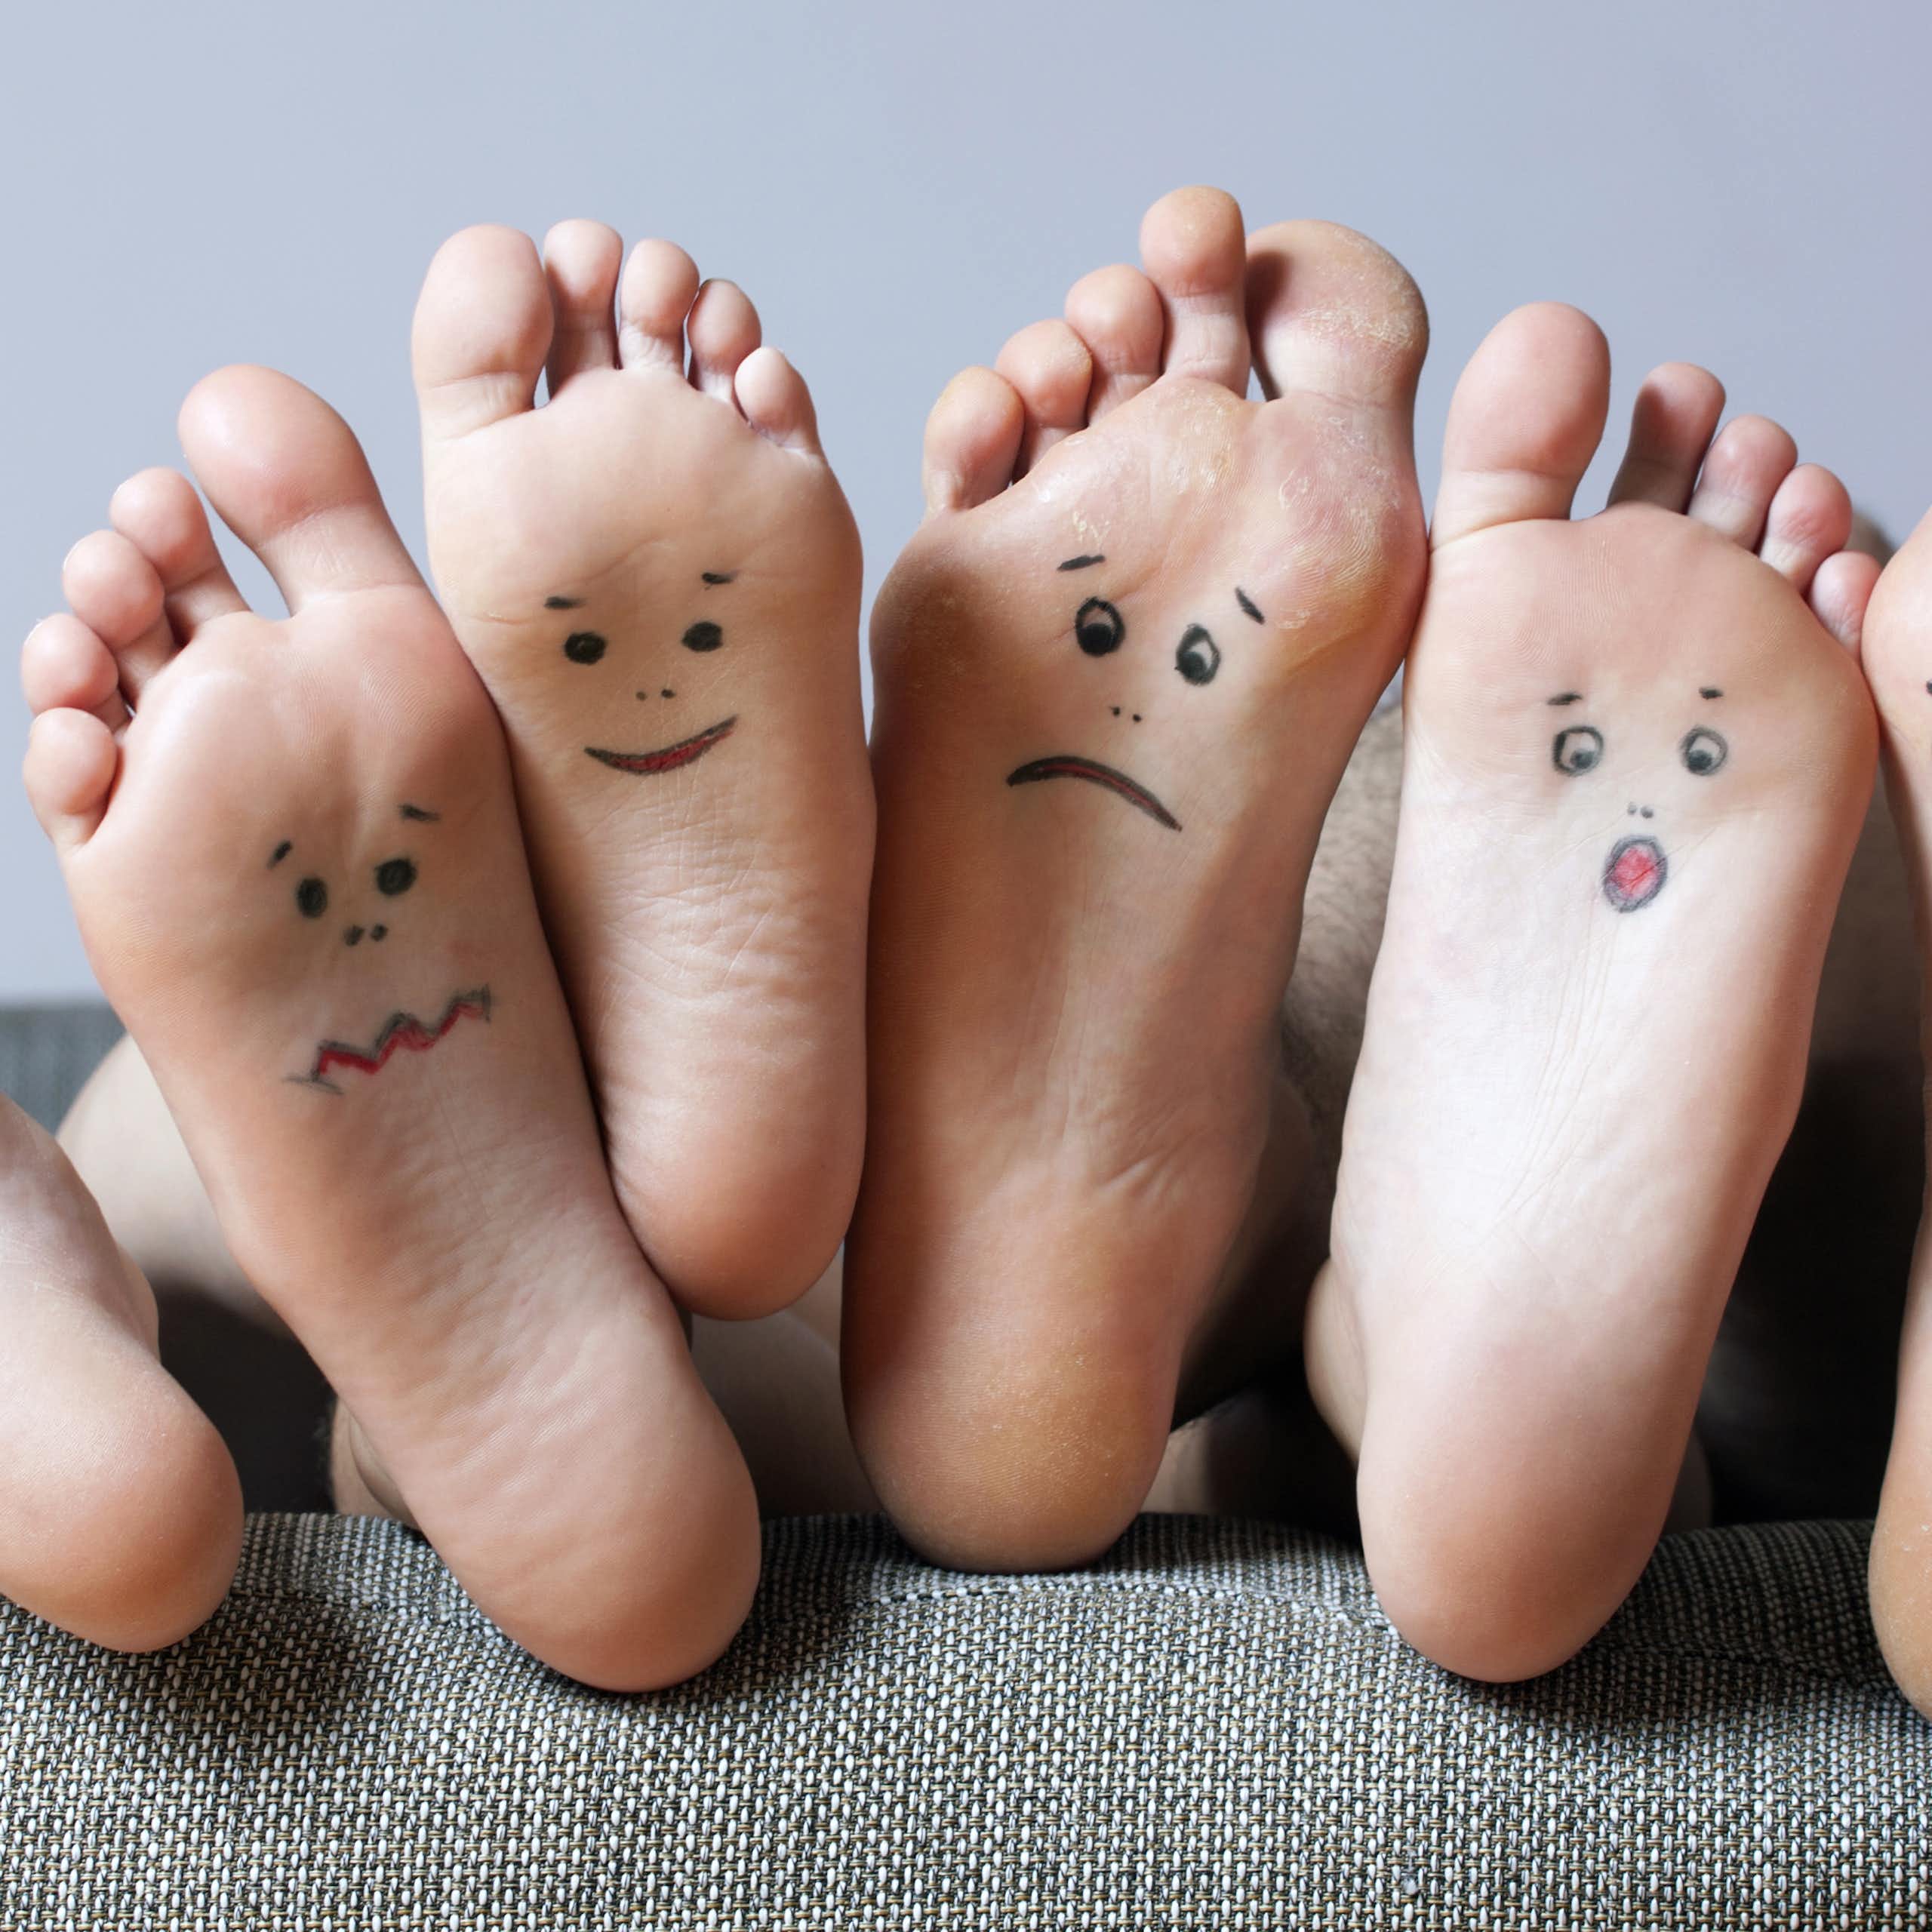 What your feet can tell you about your health